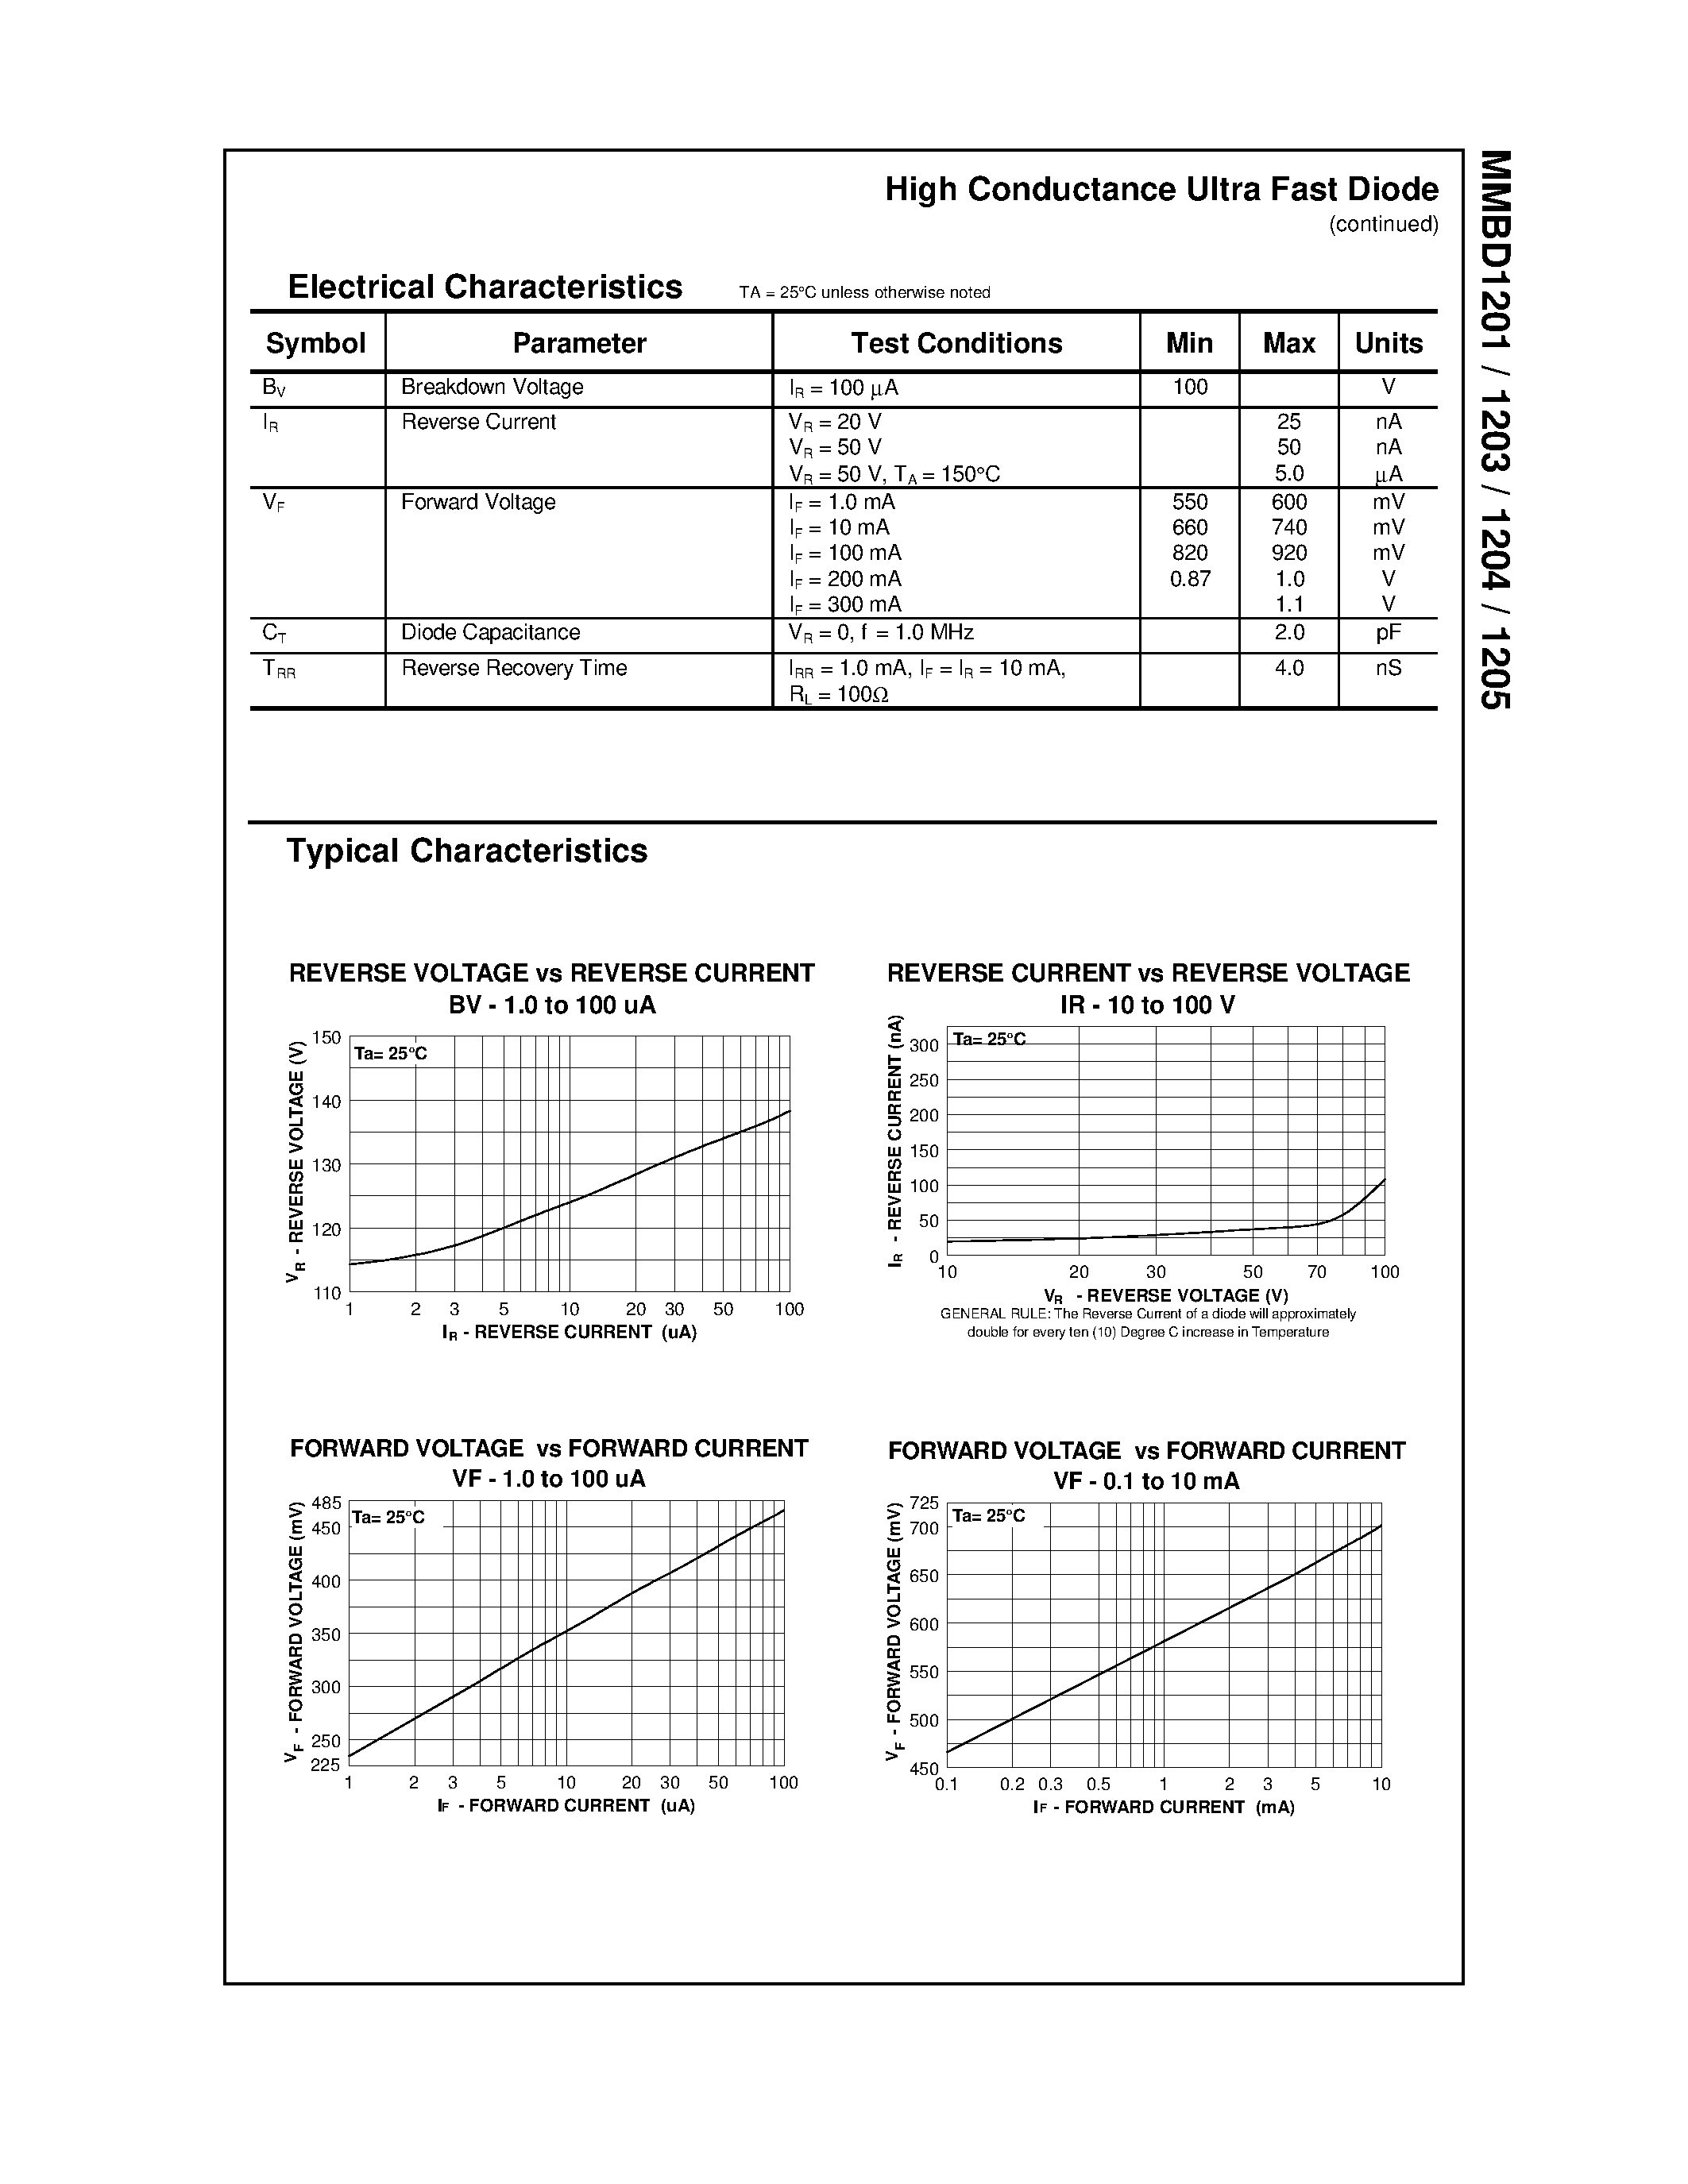 Datasheet MMBD1204 - High Conductance Ultra Fast Diode page 2